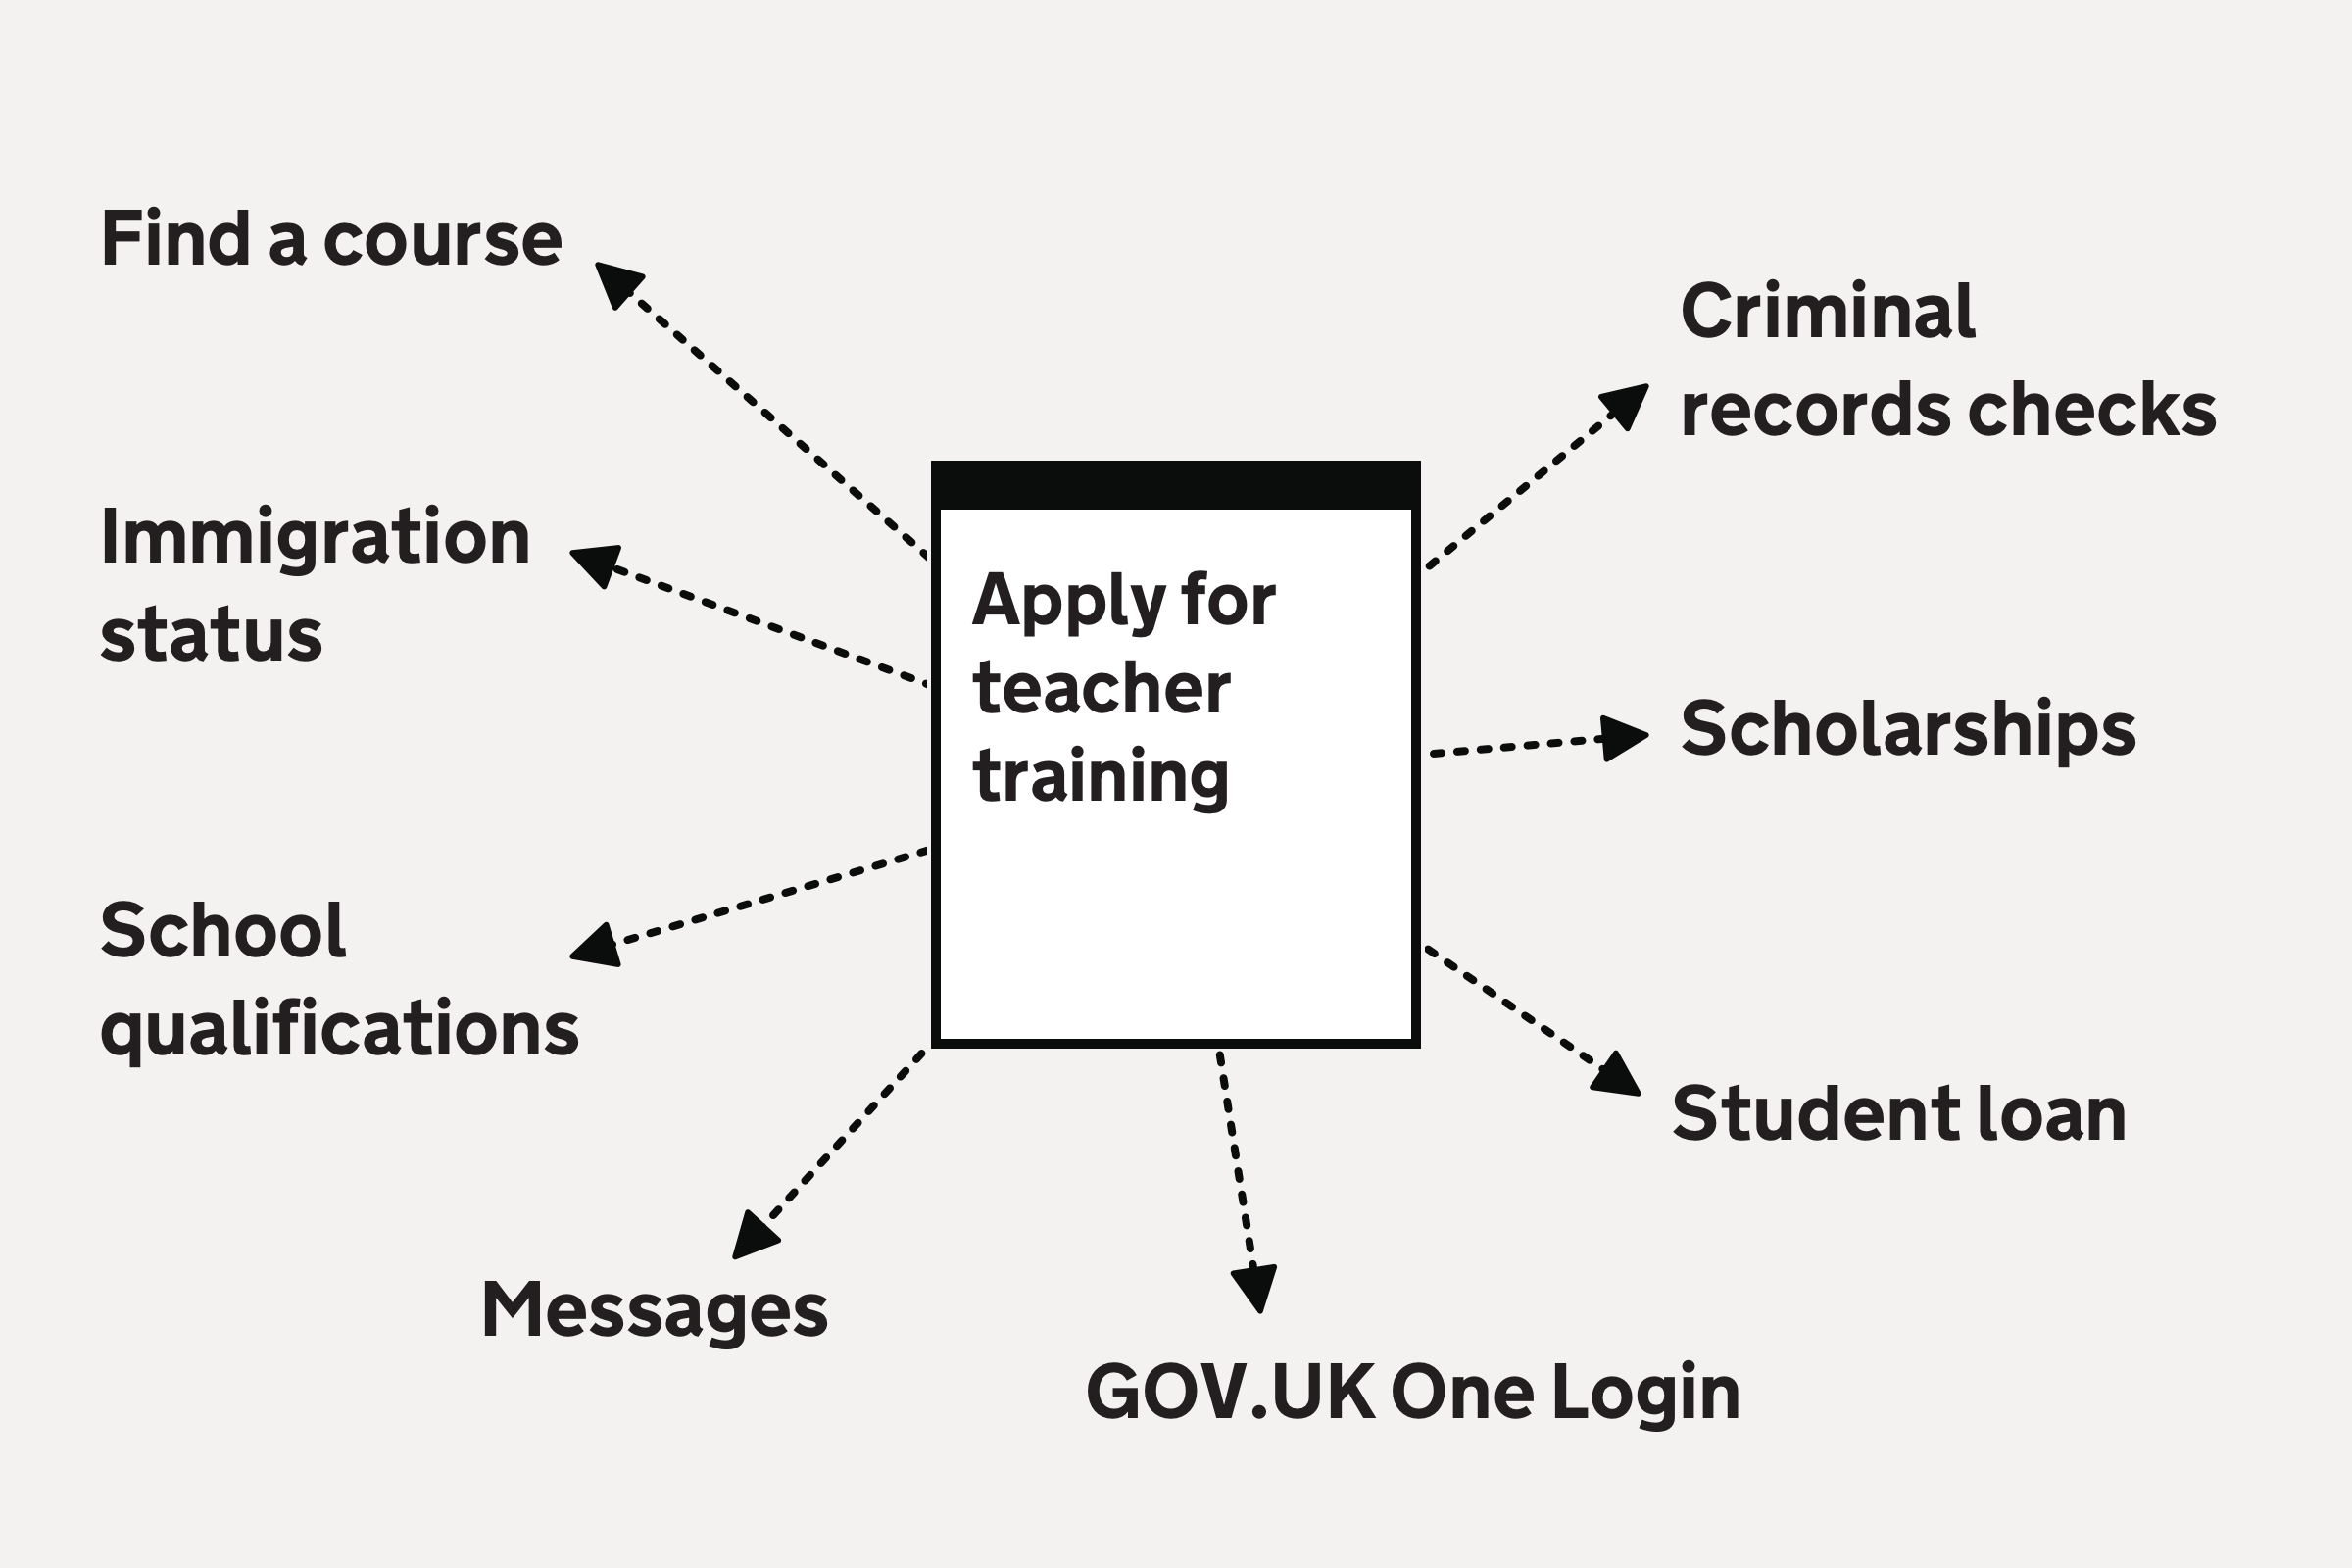 Illustration showing the Apply for teacher training service connected to lots of other services.